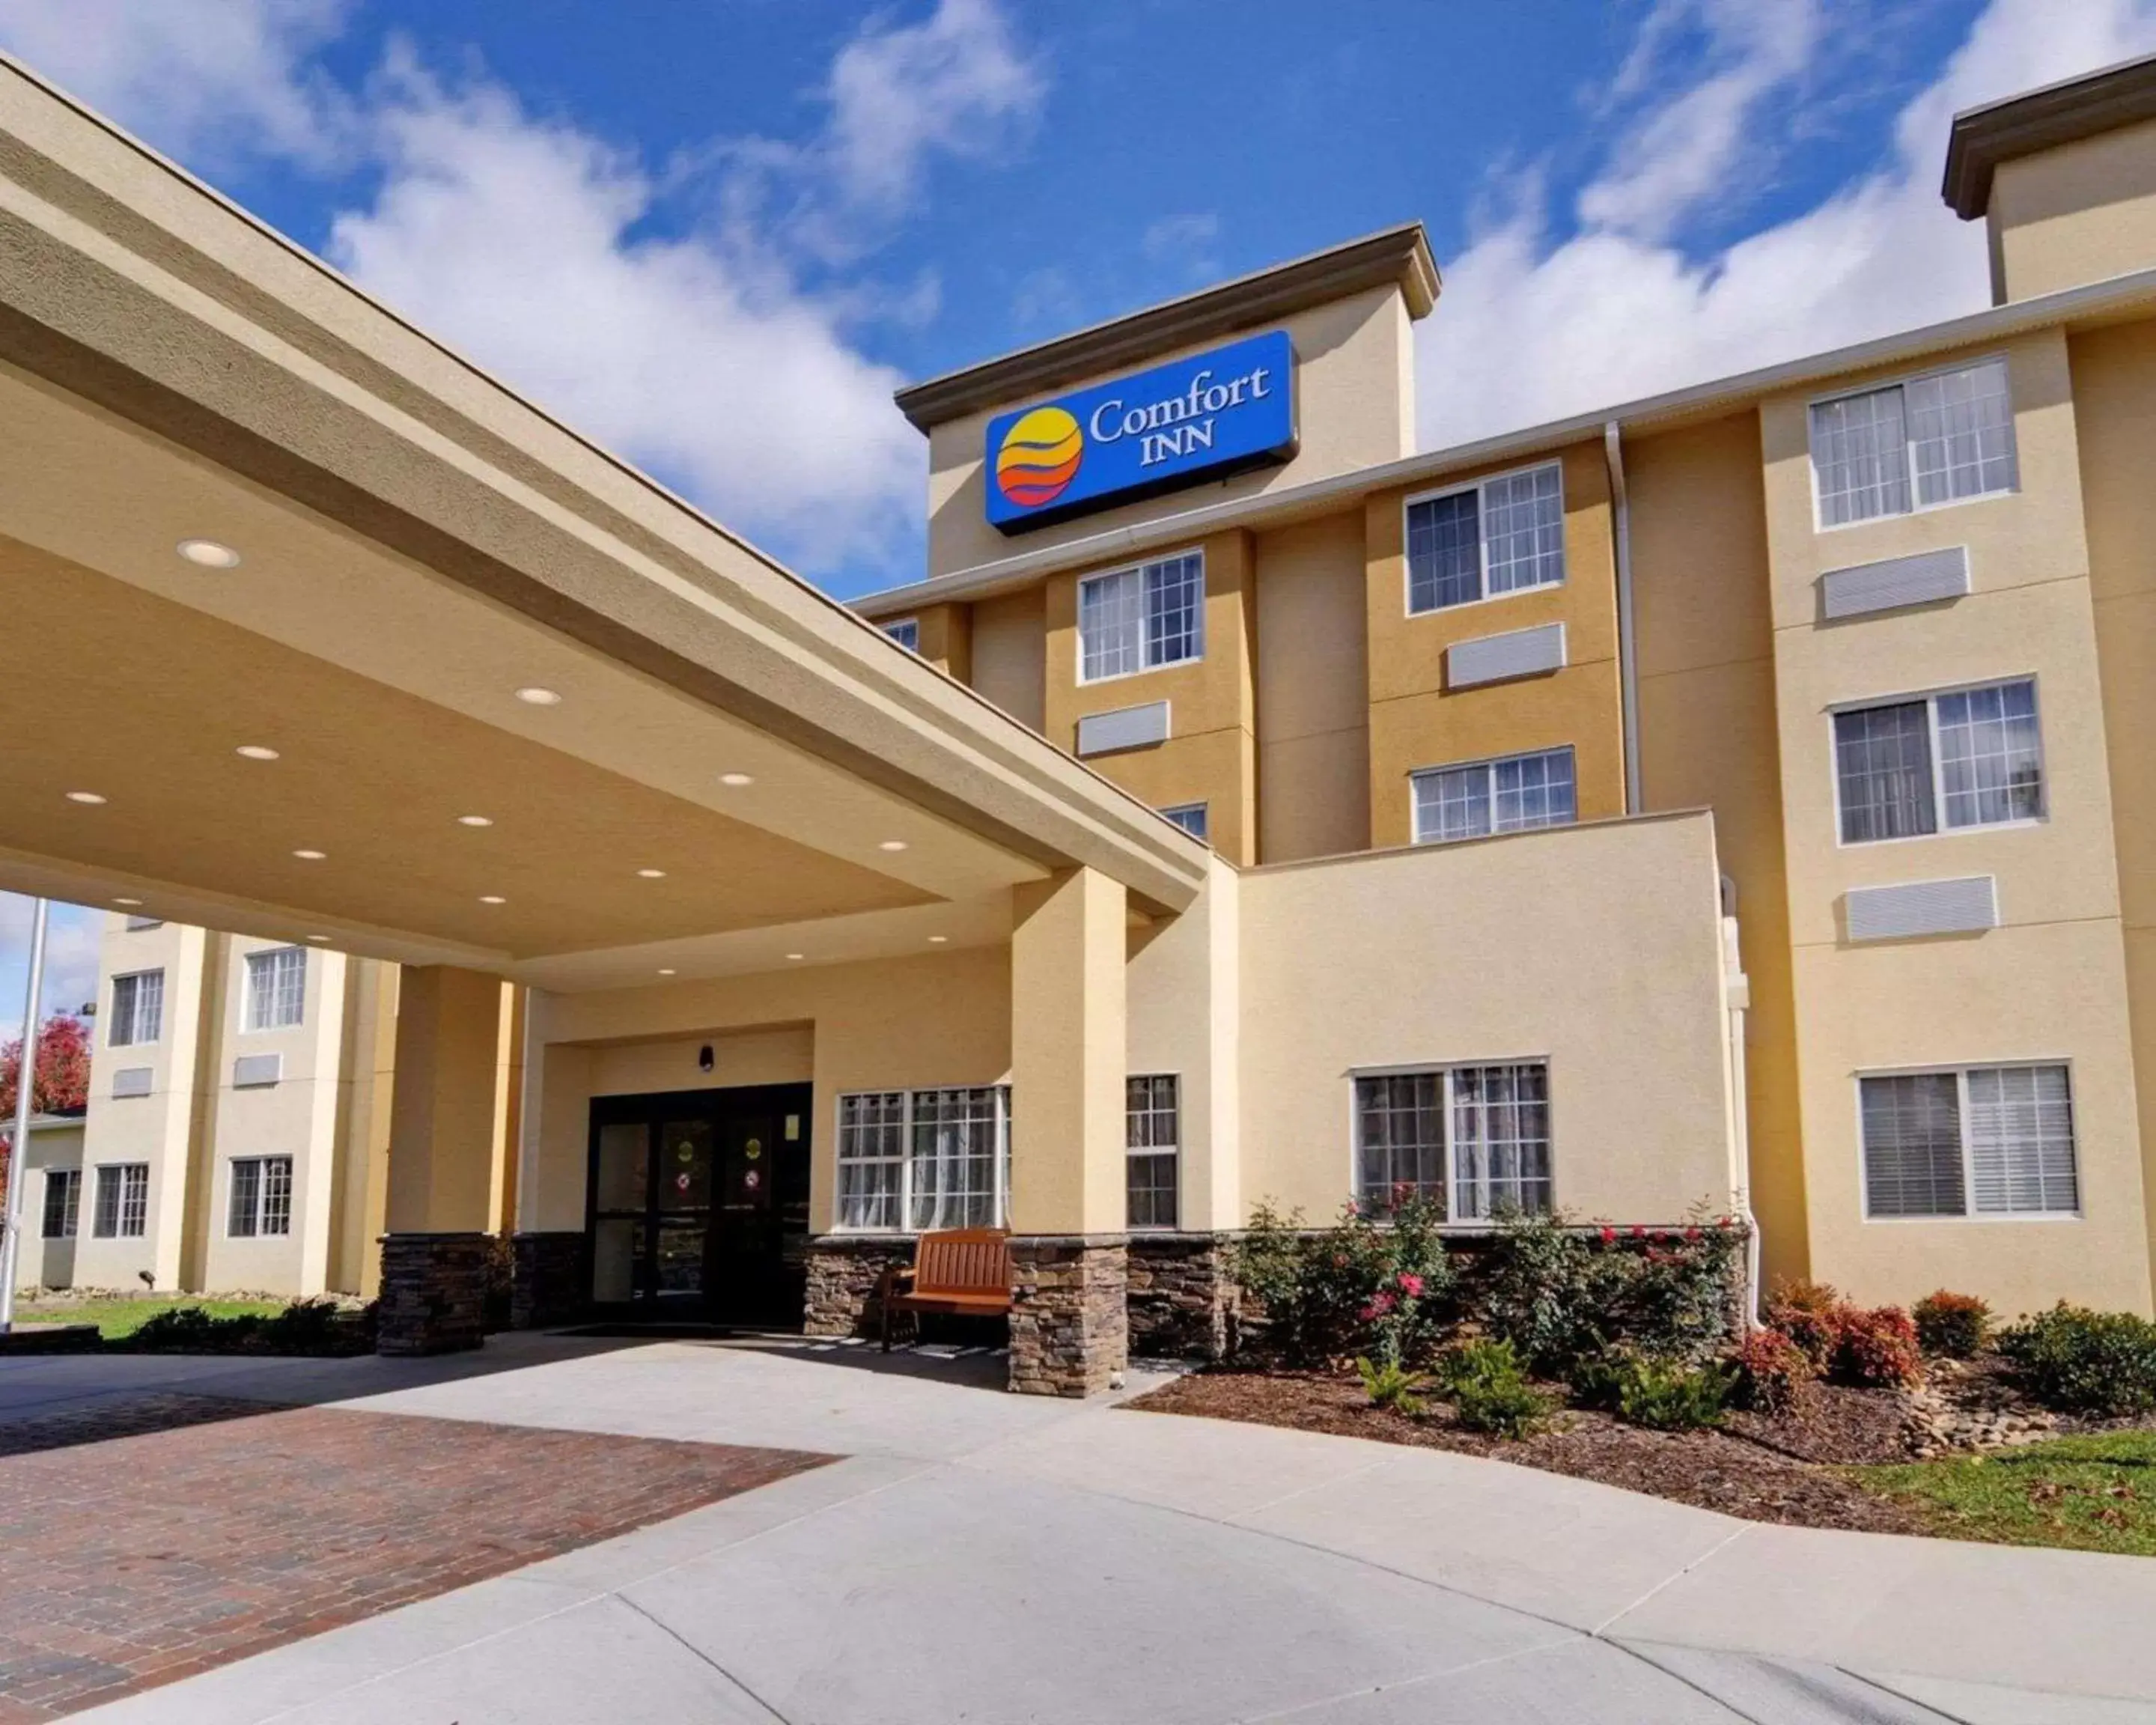 Property Building in Comfort Inn Mount Airy